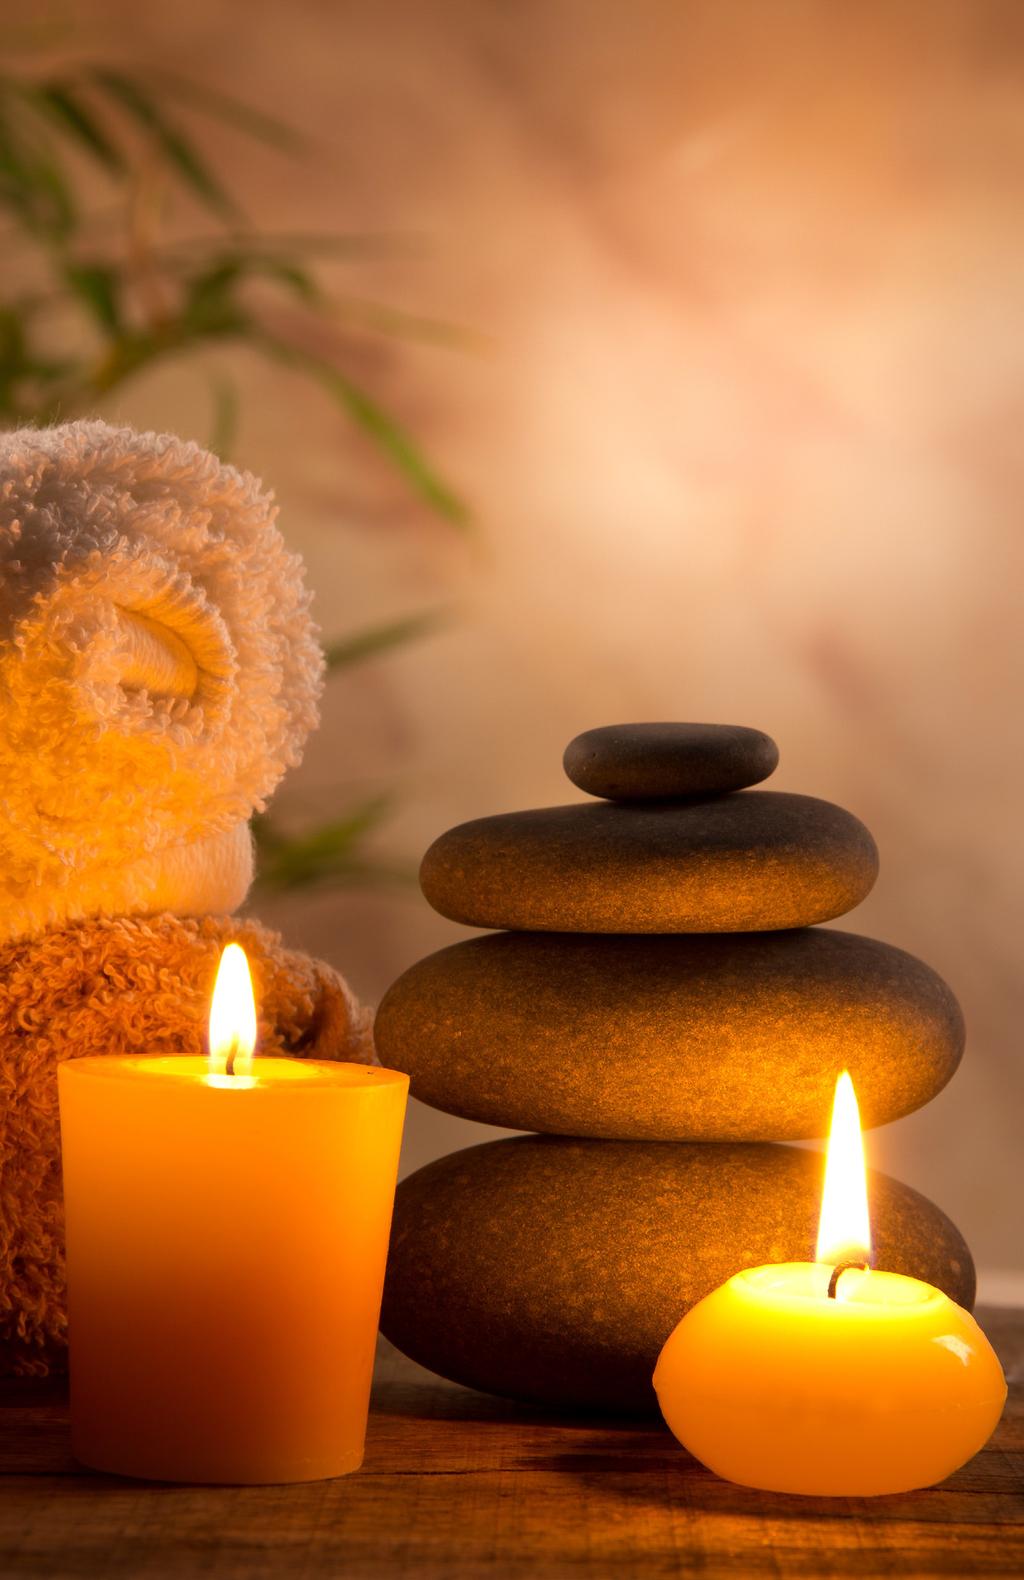 Massage Therapy R e l a x i n g Swedish Mass ag e Relaxing massage using a lighter touch and long, smooth manipulations 25 Minutes $75 50 Minutes $110 80 Minutes $135 T h e r a p e u t i c Deep